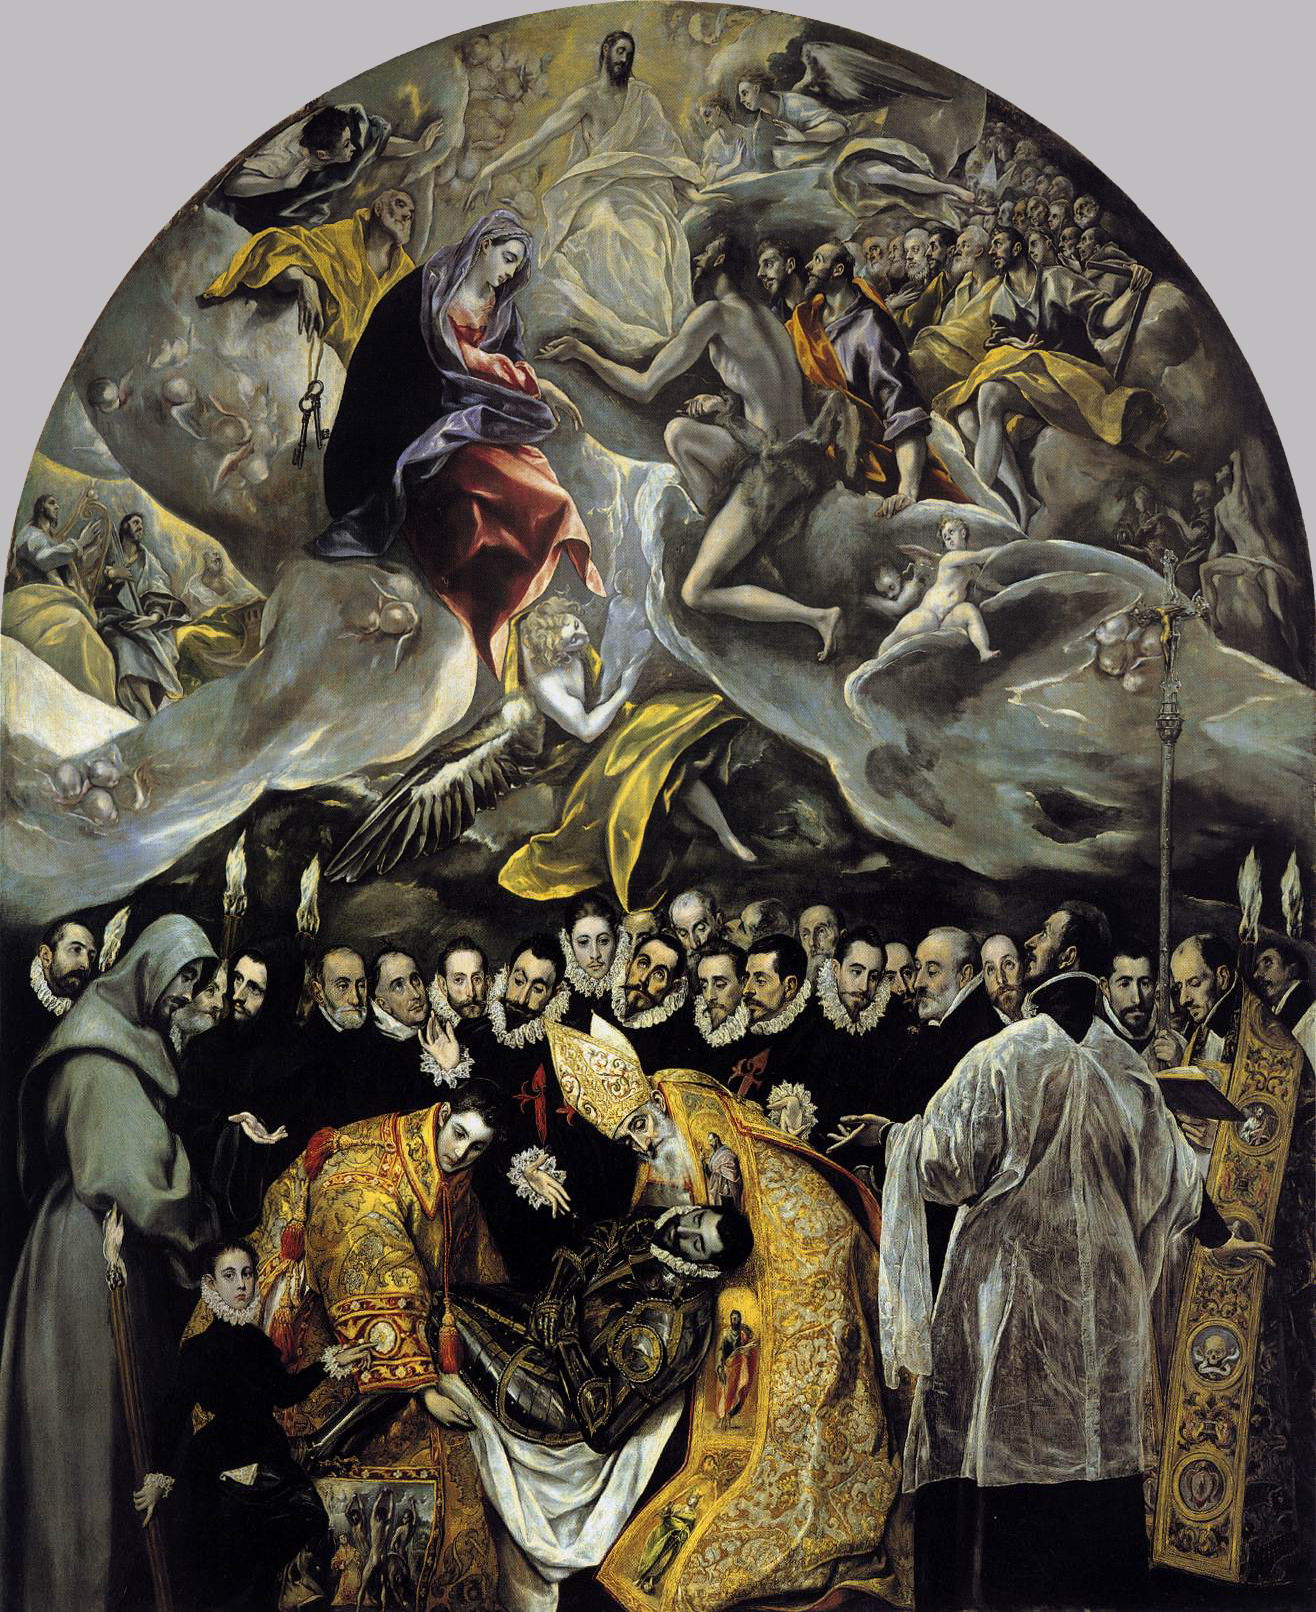 The Burial of the Count of Orgaz (1587).